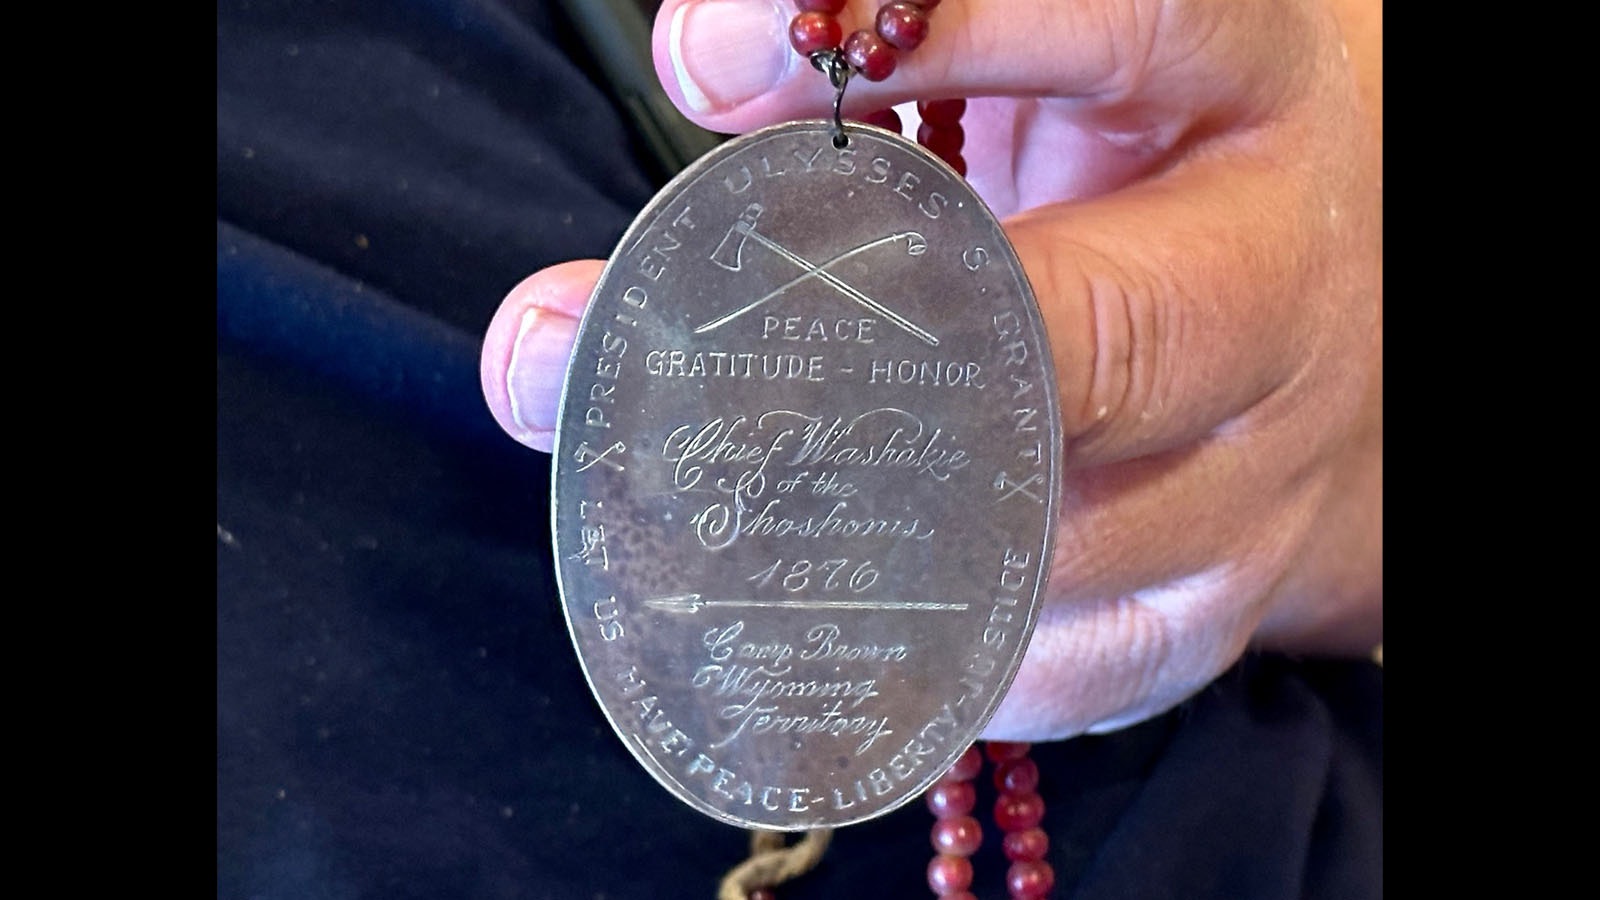 Lander native Kim Redding said he recently found this sterling silver peace medal on eBay. He thinks it’s an authentic and extremely rare artifact, issued to Eastern Shoshone leader Chief Washakie from President Ulysses S. Grant in 1876.